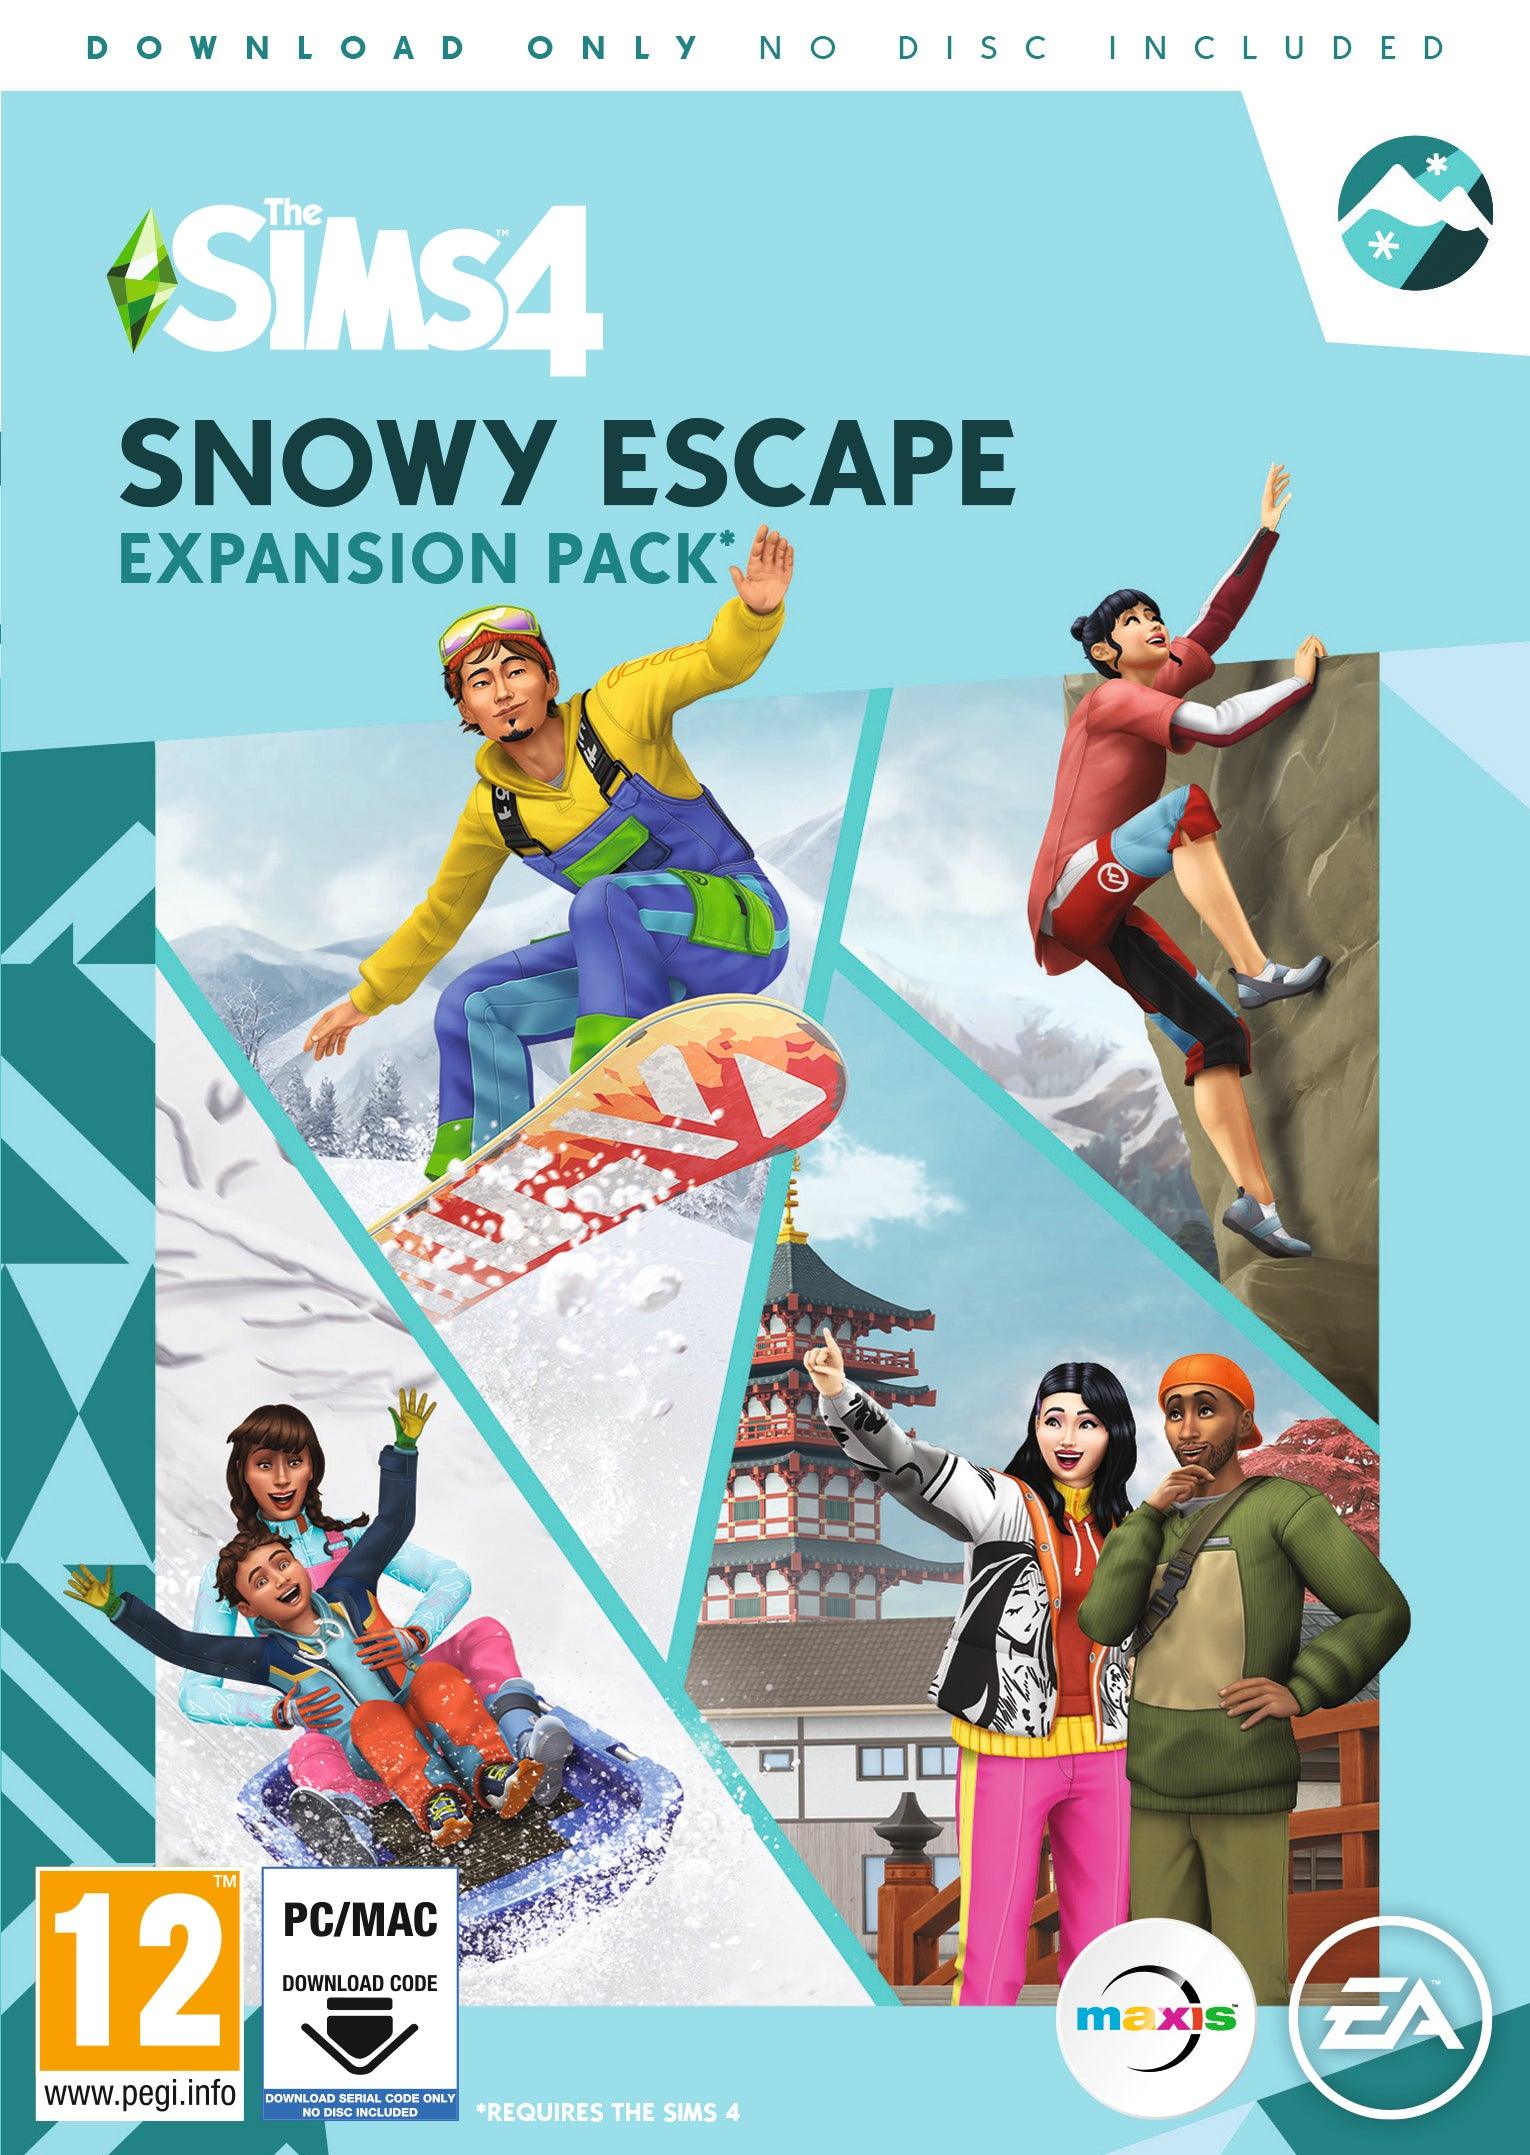 The Sims 4 Snowy Escape - Want a New Gadget